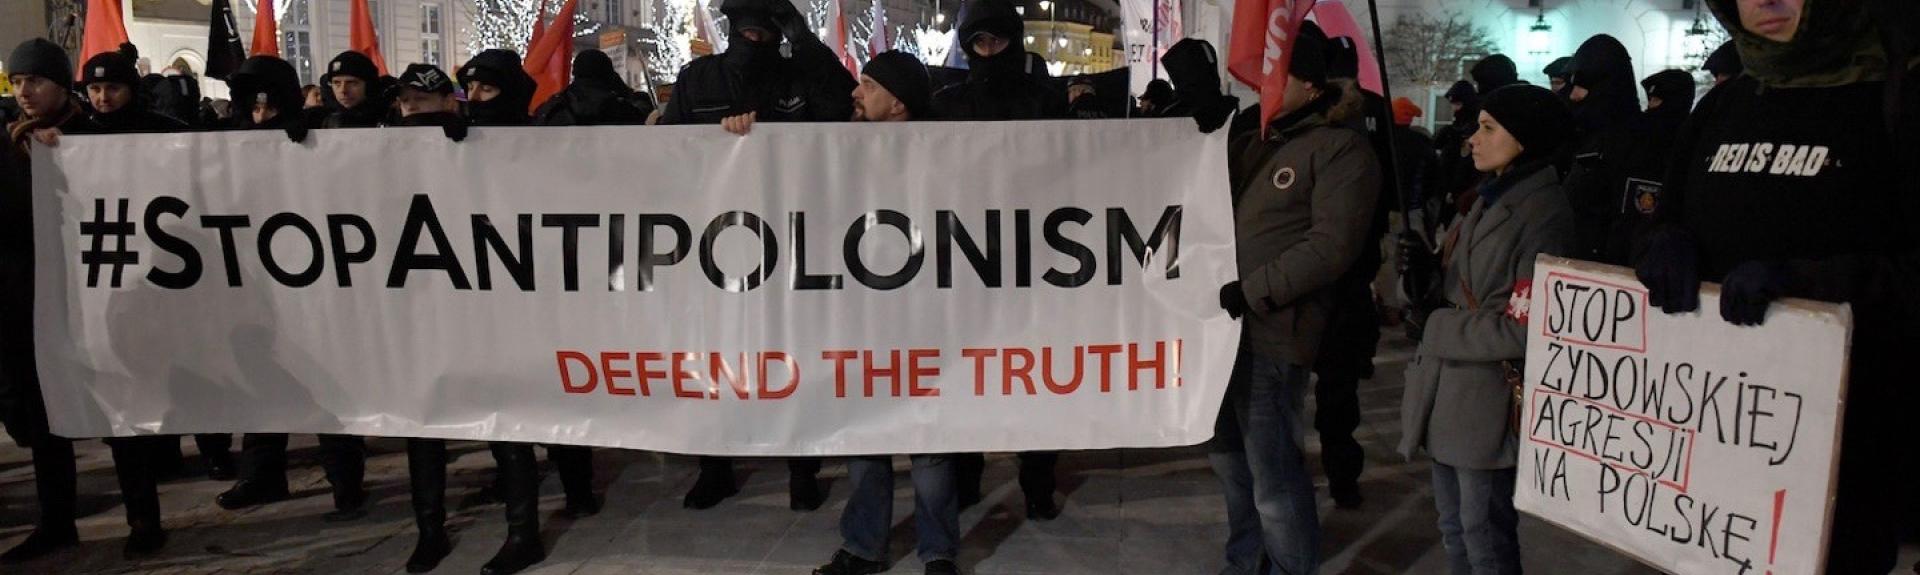 protestors in Warsaw hold banner that reads 'Stop Anti-Polonism'